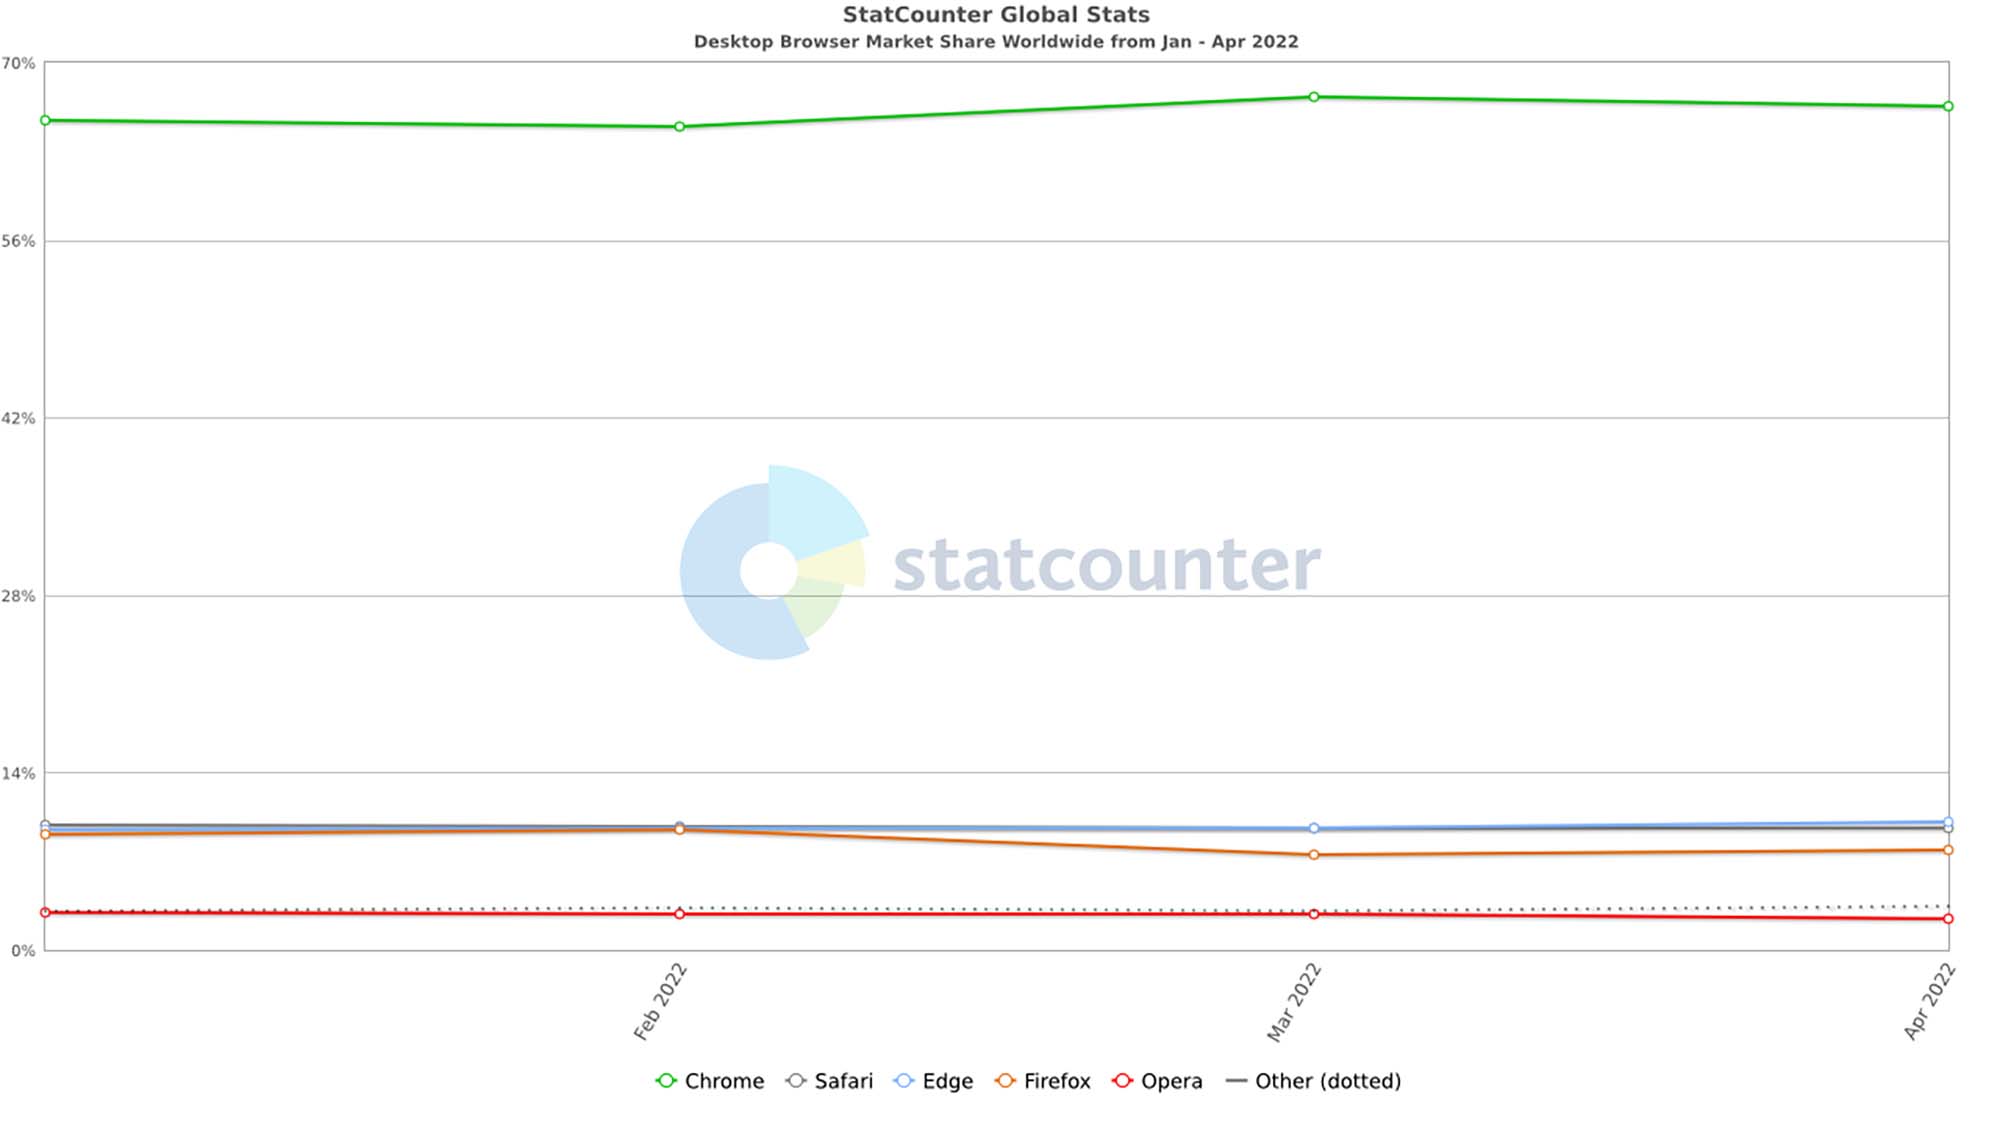 A chart showing the relative market shares of competing web browsers